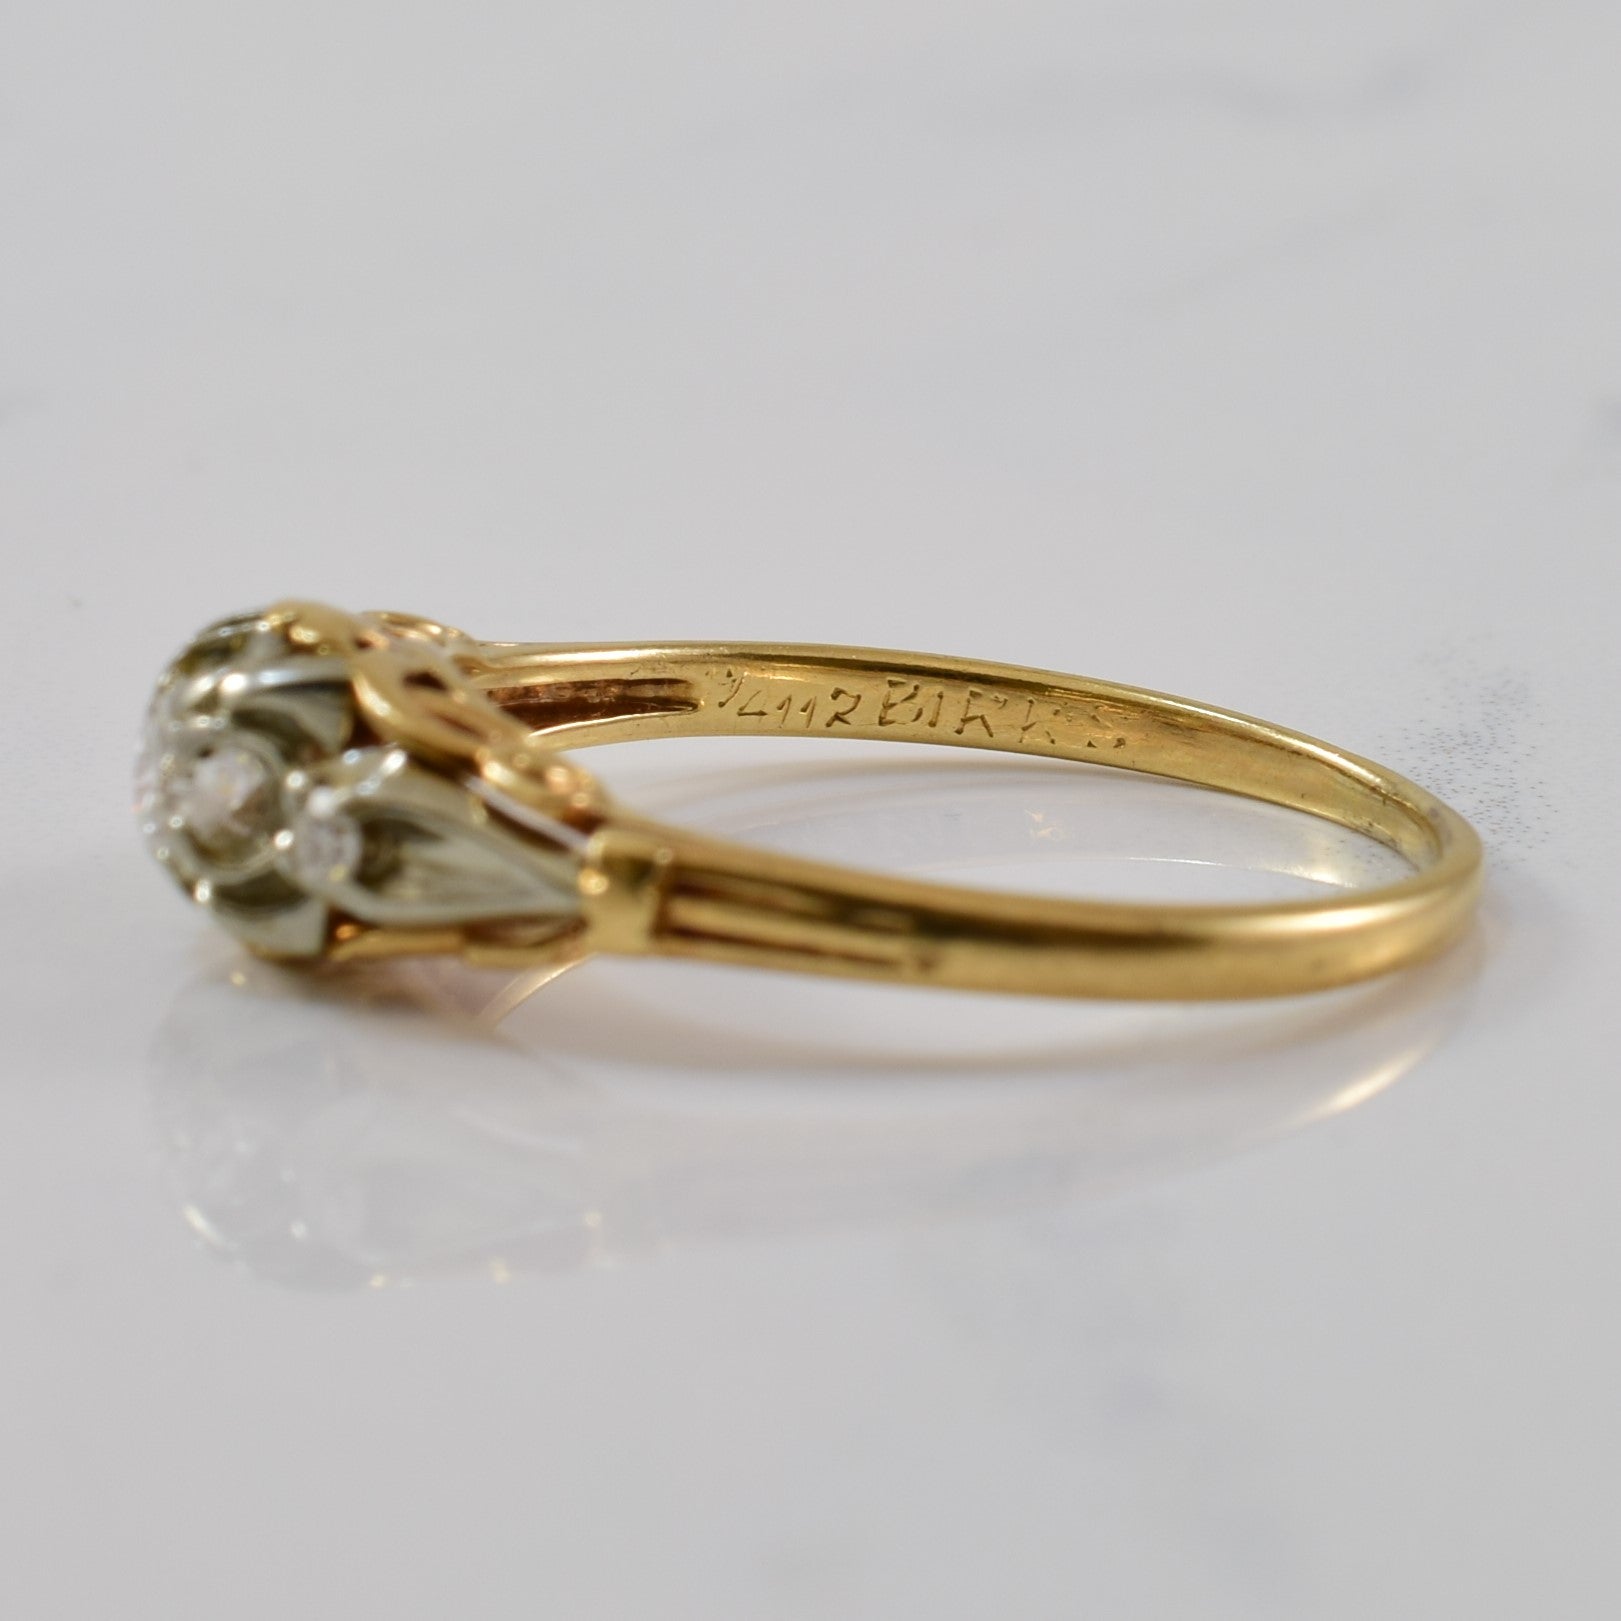 Vintage rings for sale in Canada, round brilliant rings with diamond and gold, round brilliant cut